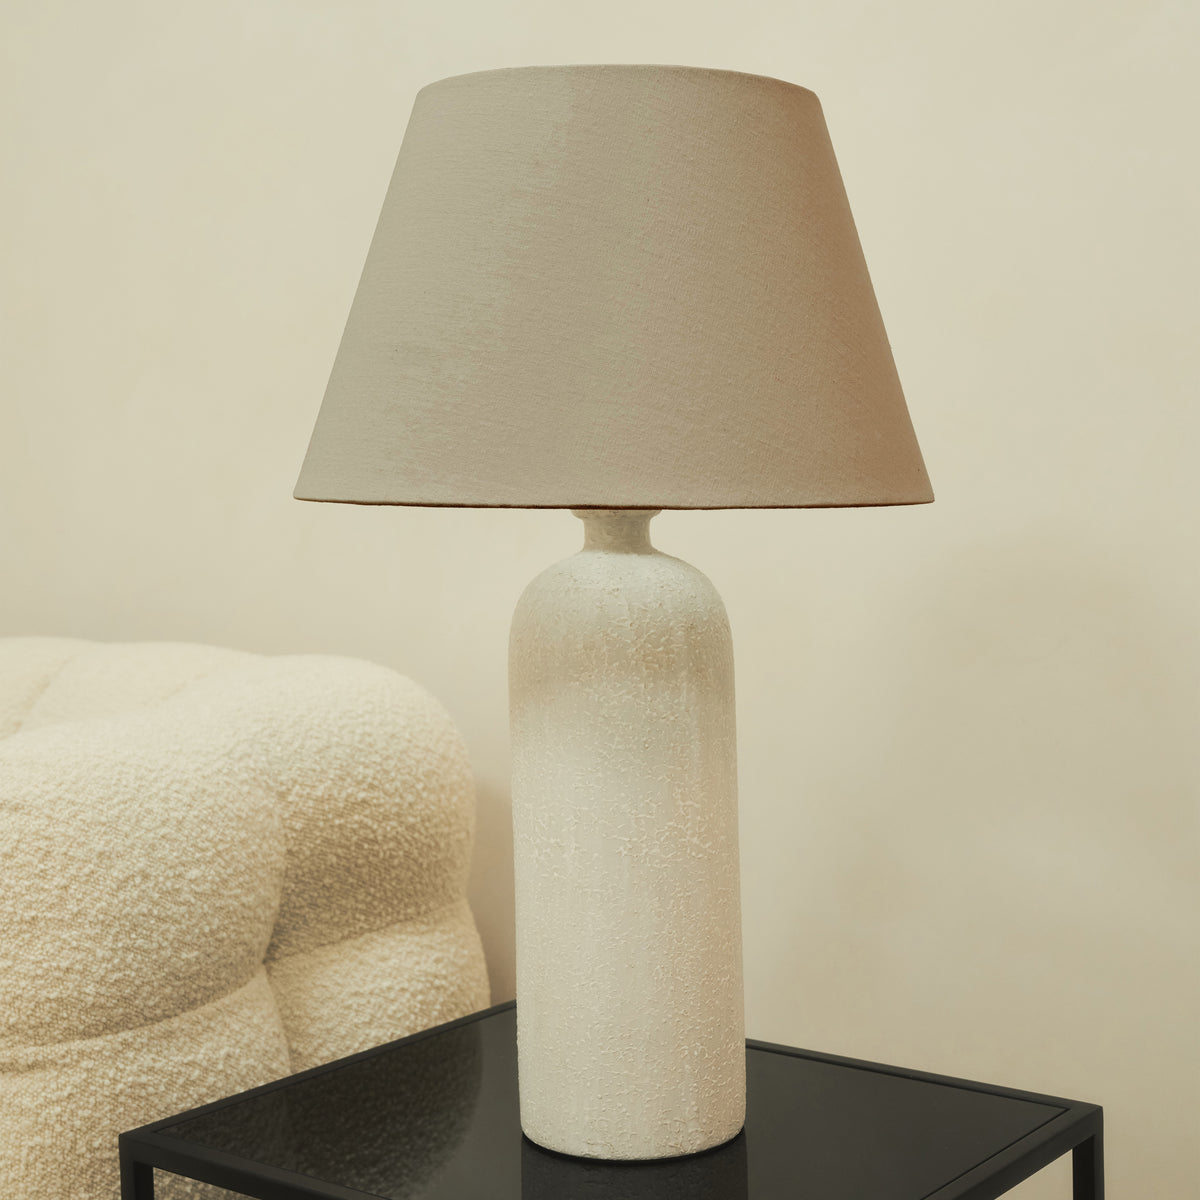 Textured Ceramic Based Table Lamp Beige Shade on brooklyn table